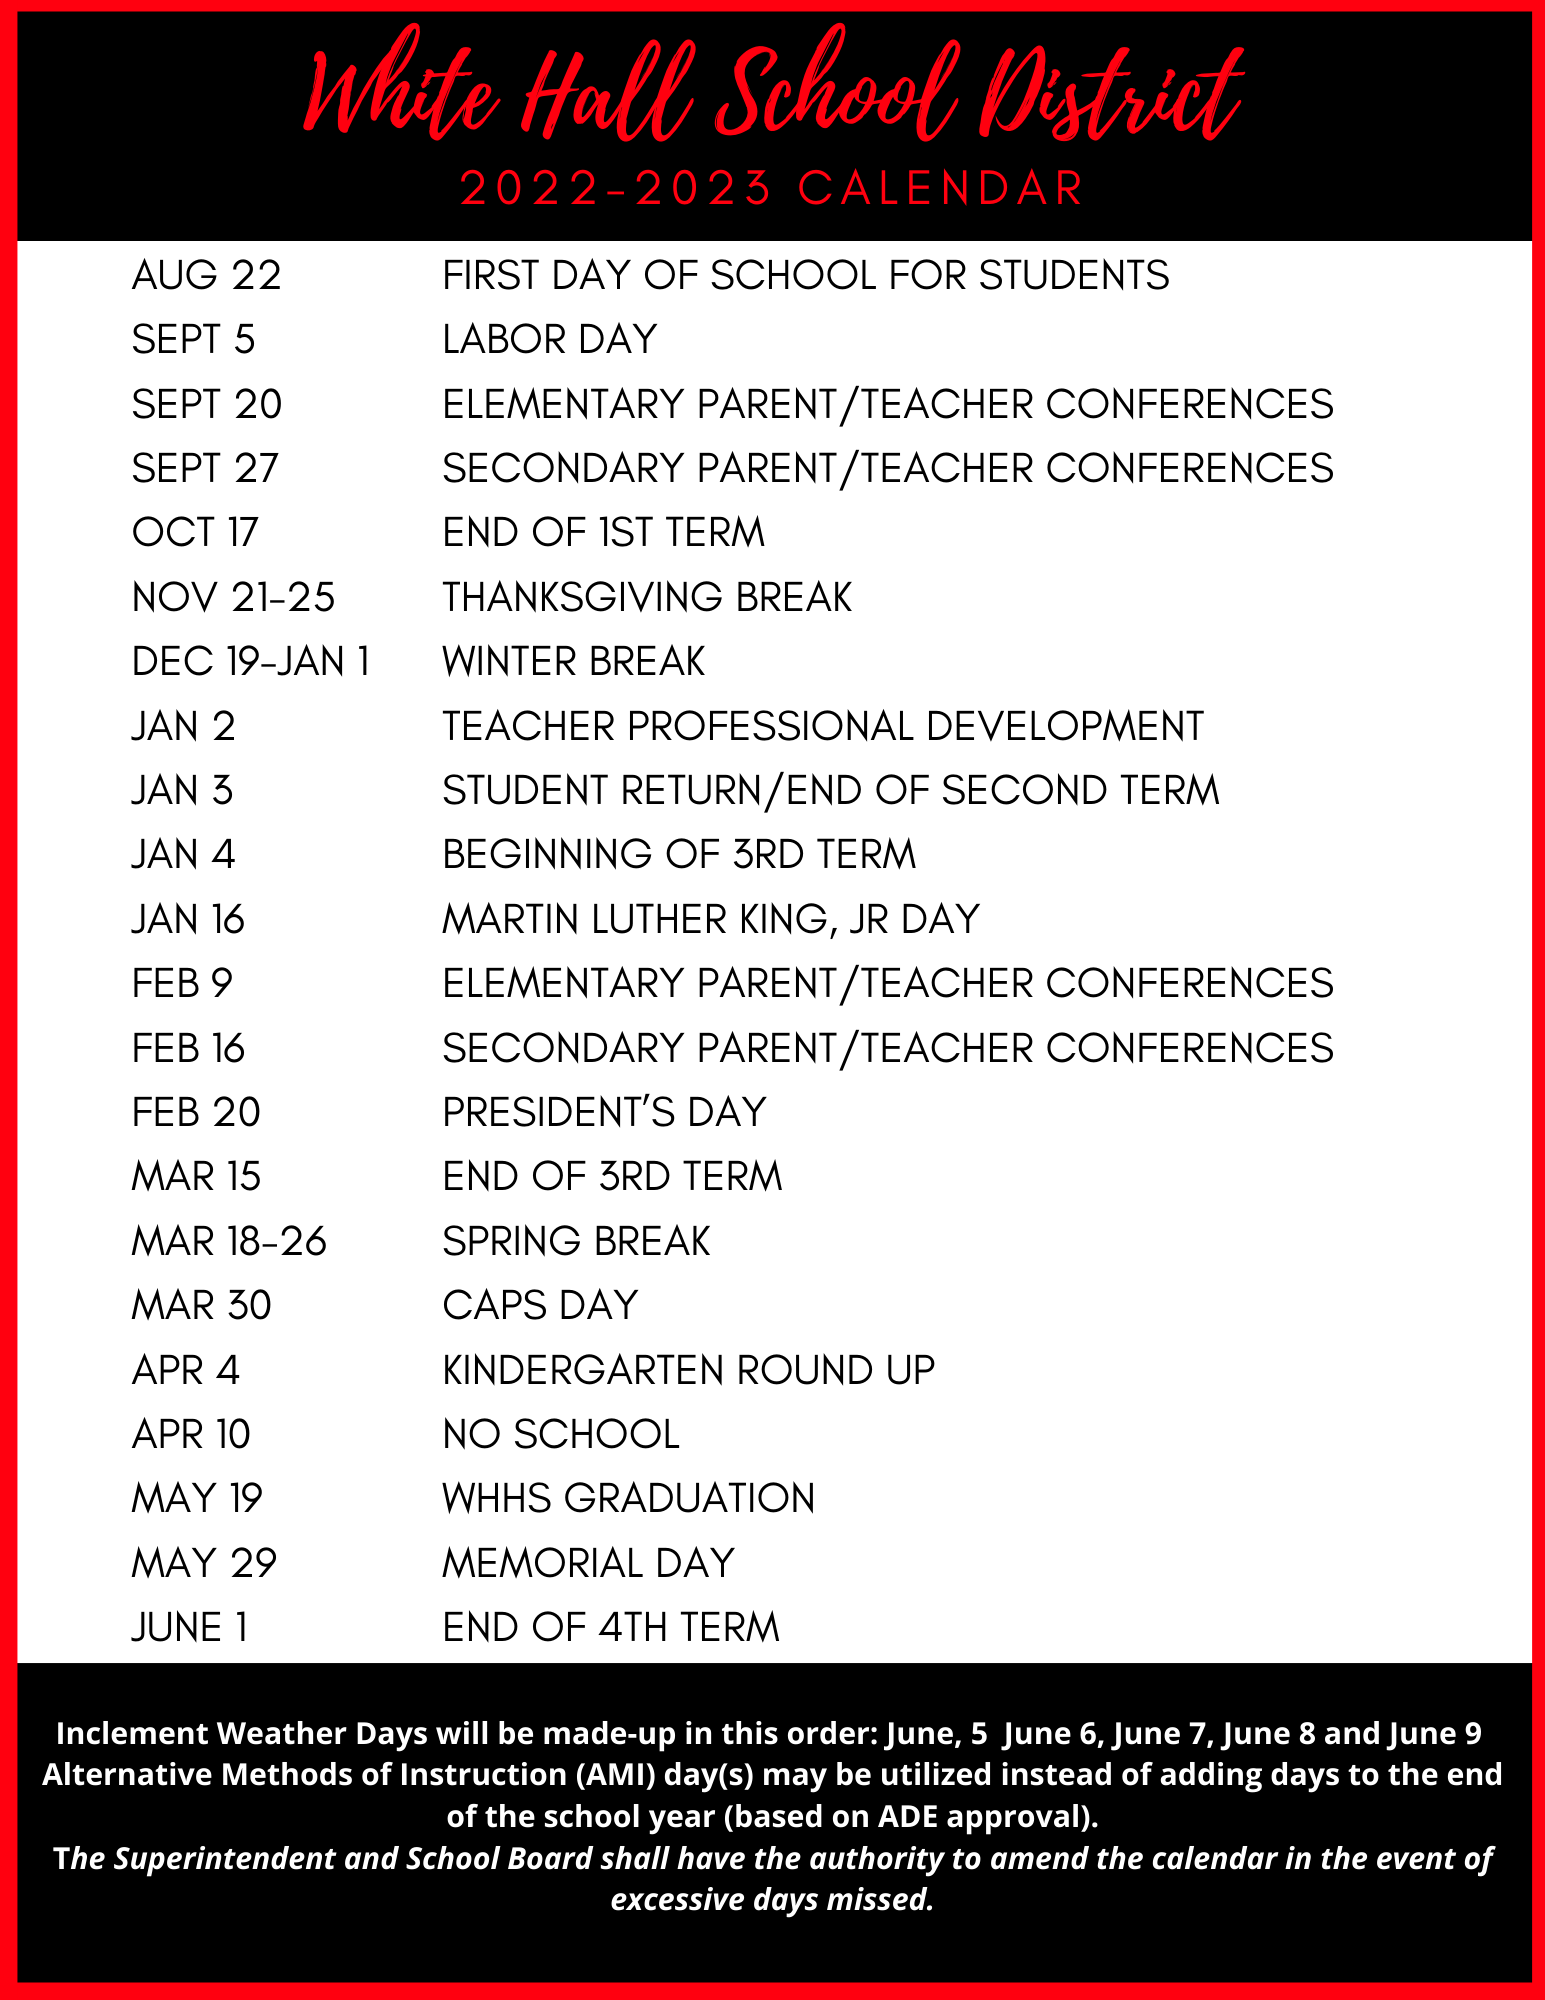 District Calendar of Events White Hall School District